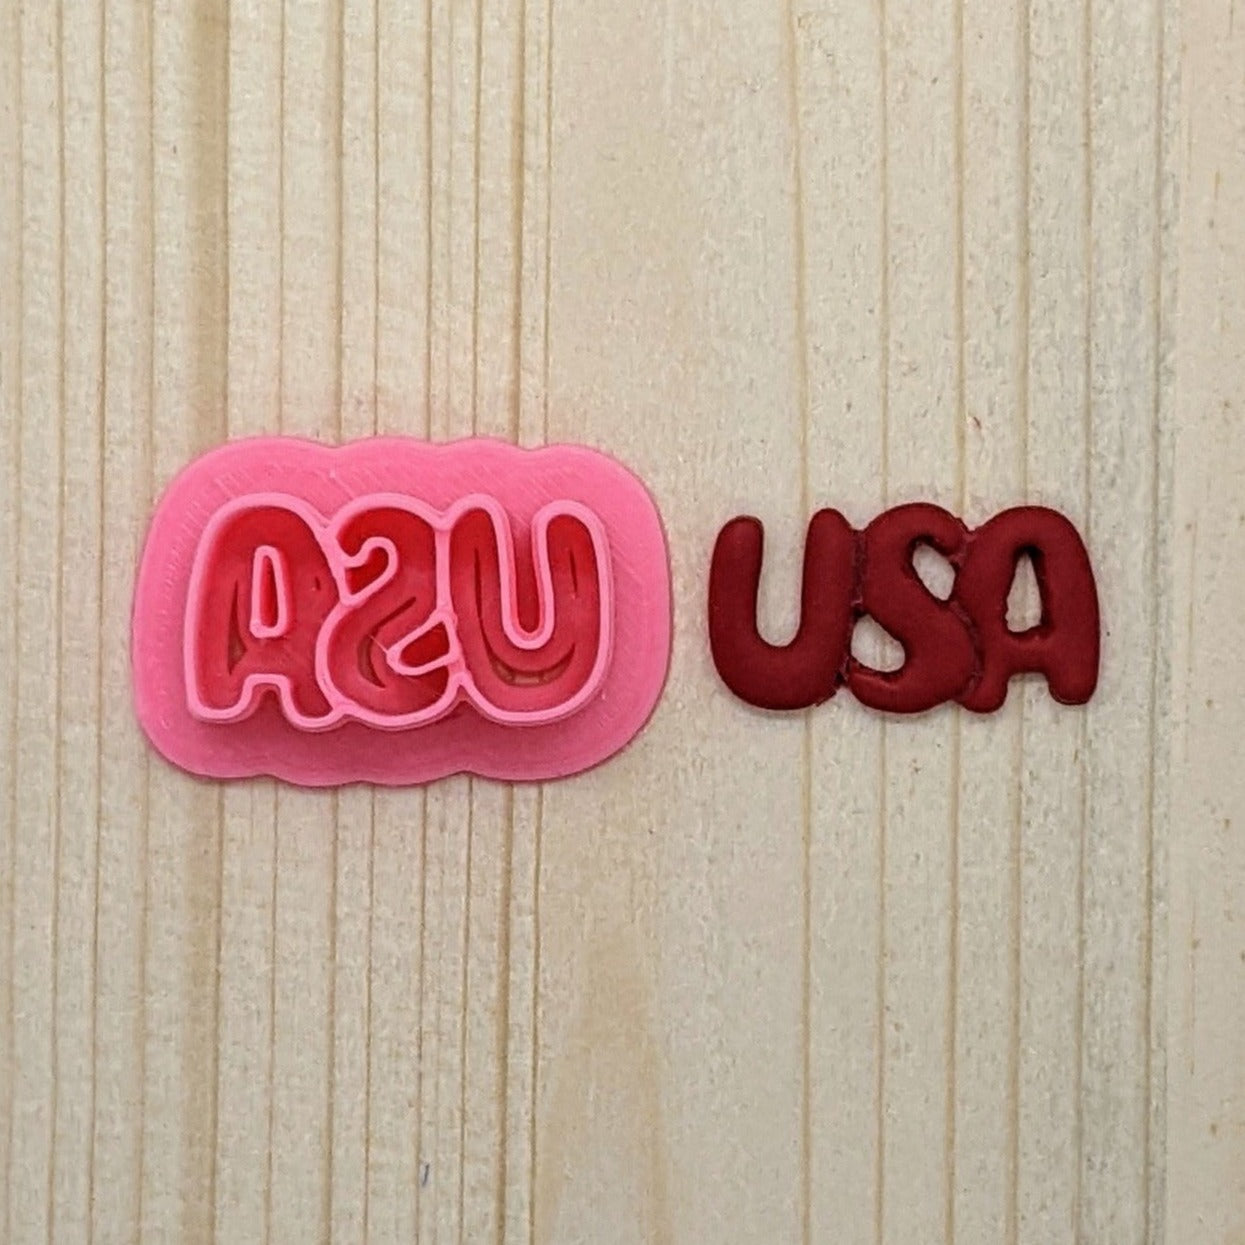 USA Bubble Letters Cookie Cutter for Cookies, Ceramics, Pottery, Polymer Clay, Fondant - Multi-Medium Craft & Baking Tool